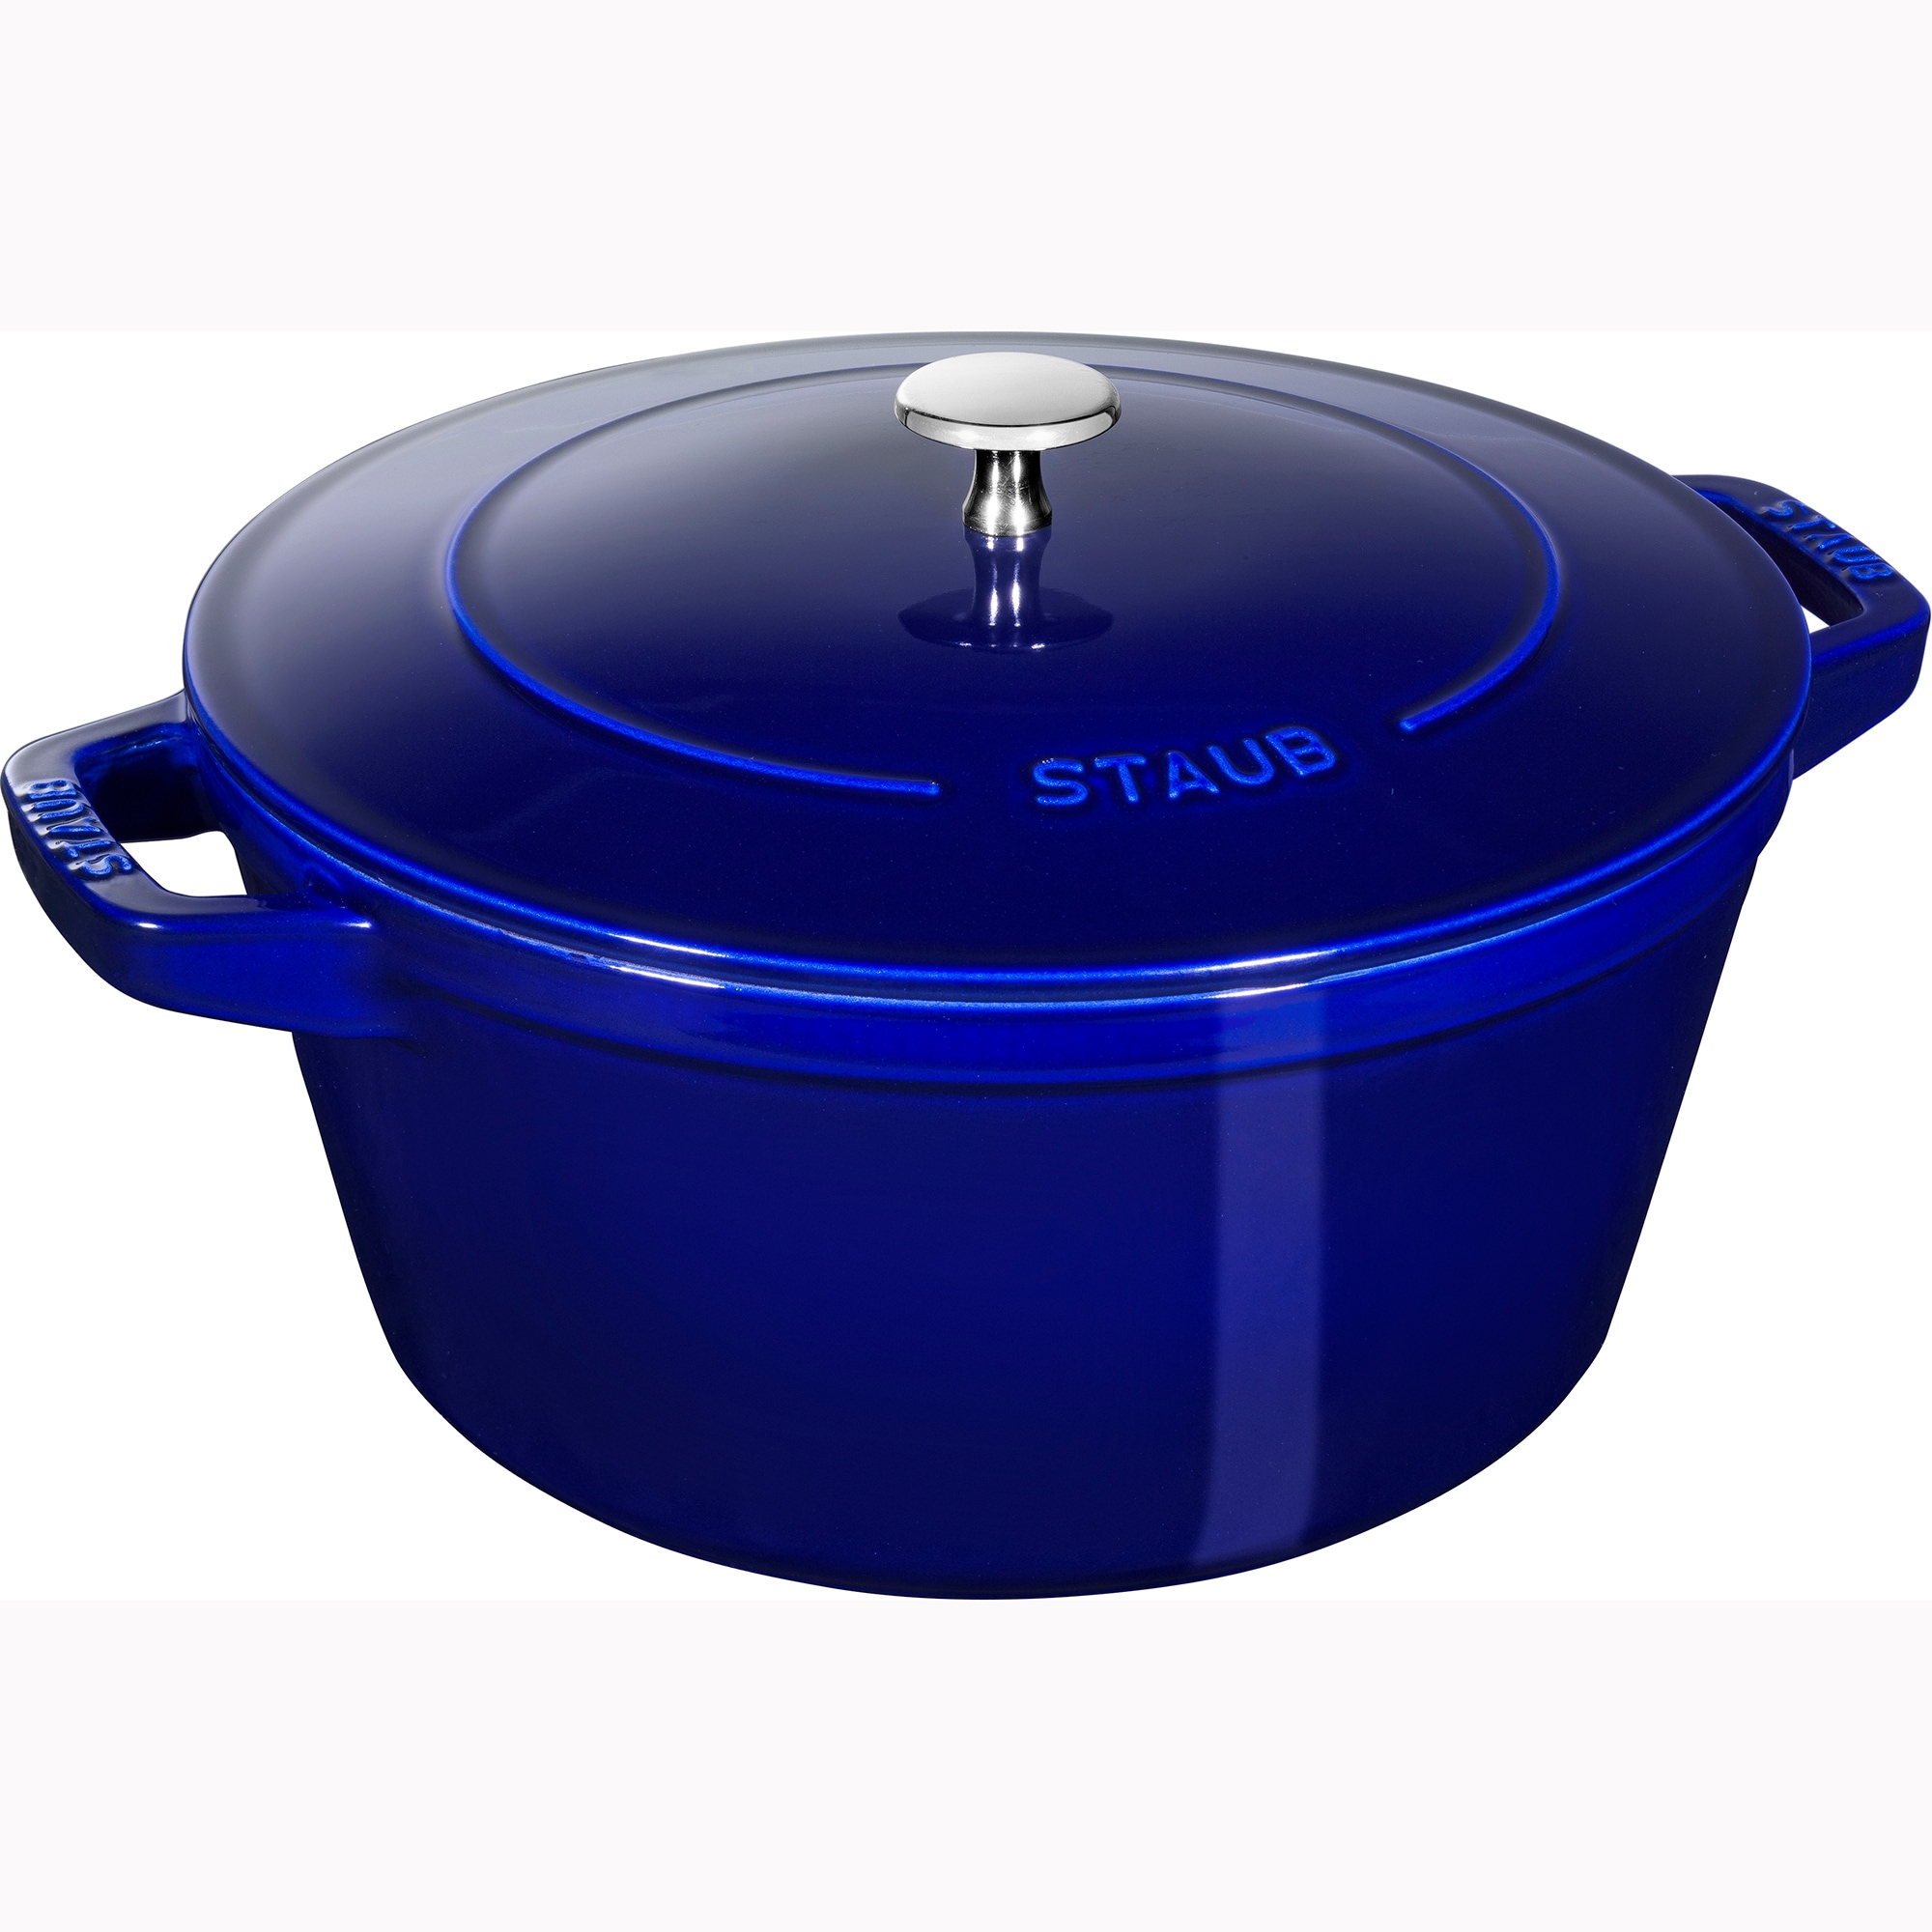 https://ak1.ostkcdn.com/images/products/is/images/direct/524e71cf9f5a14186d83cd876461f39bf4101273/Staub-Cast-Iron-4-pc-Stackable-Set.jpg